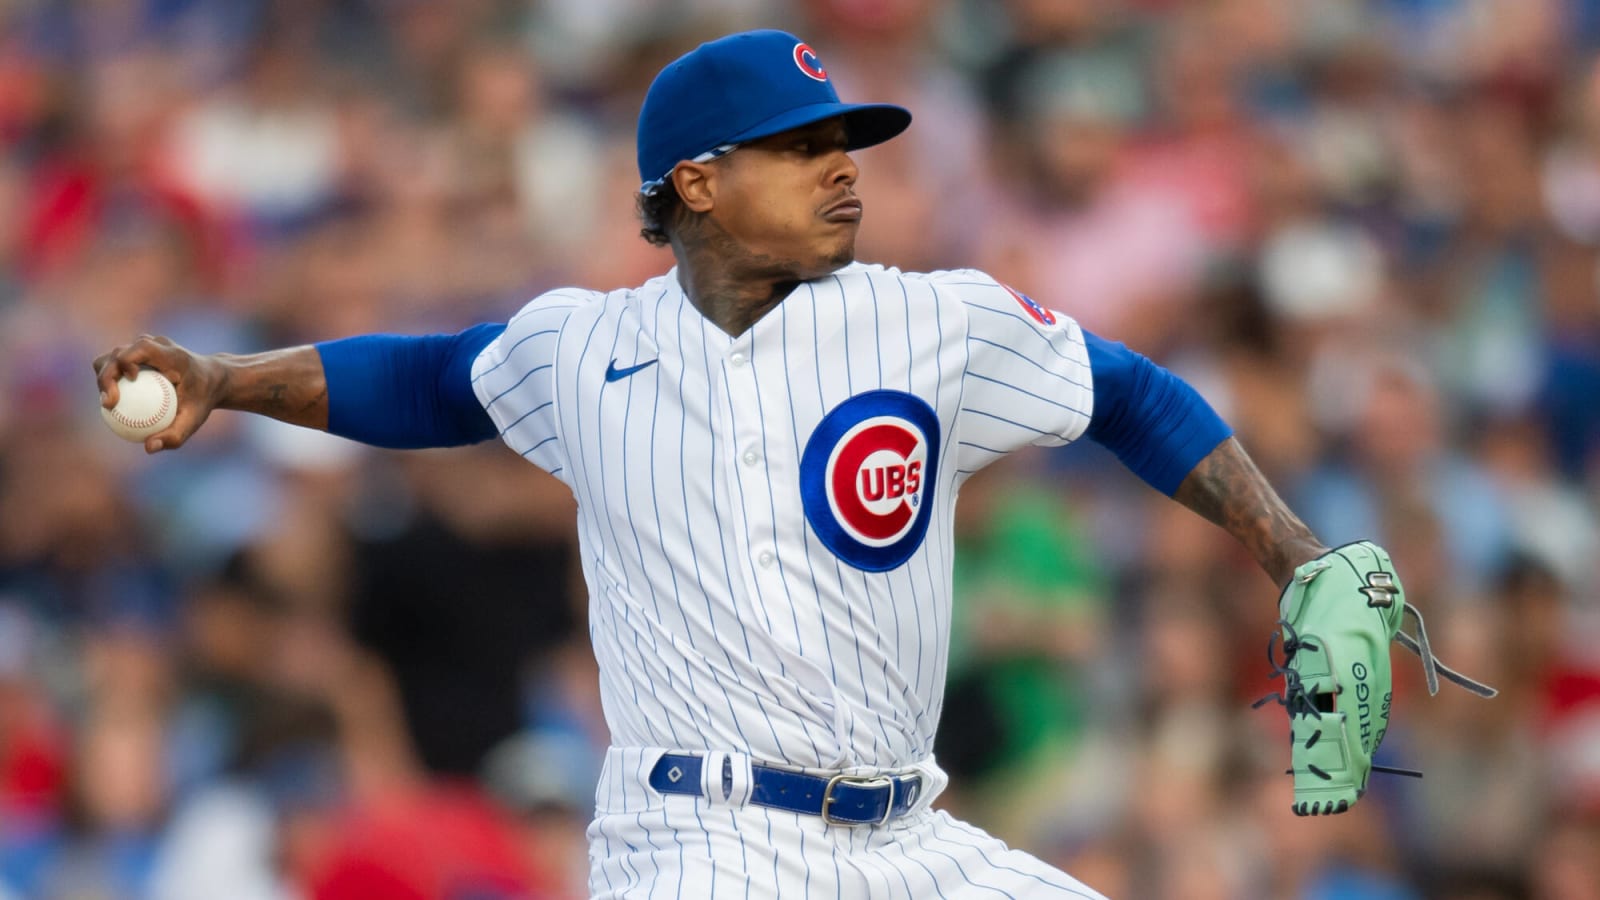 The Key to the Cubs' Playoff Hopes? Marcus Stroman